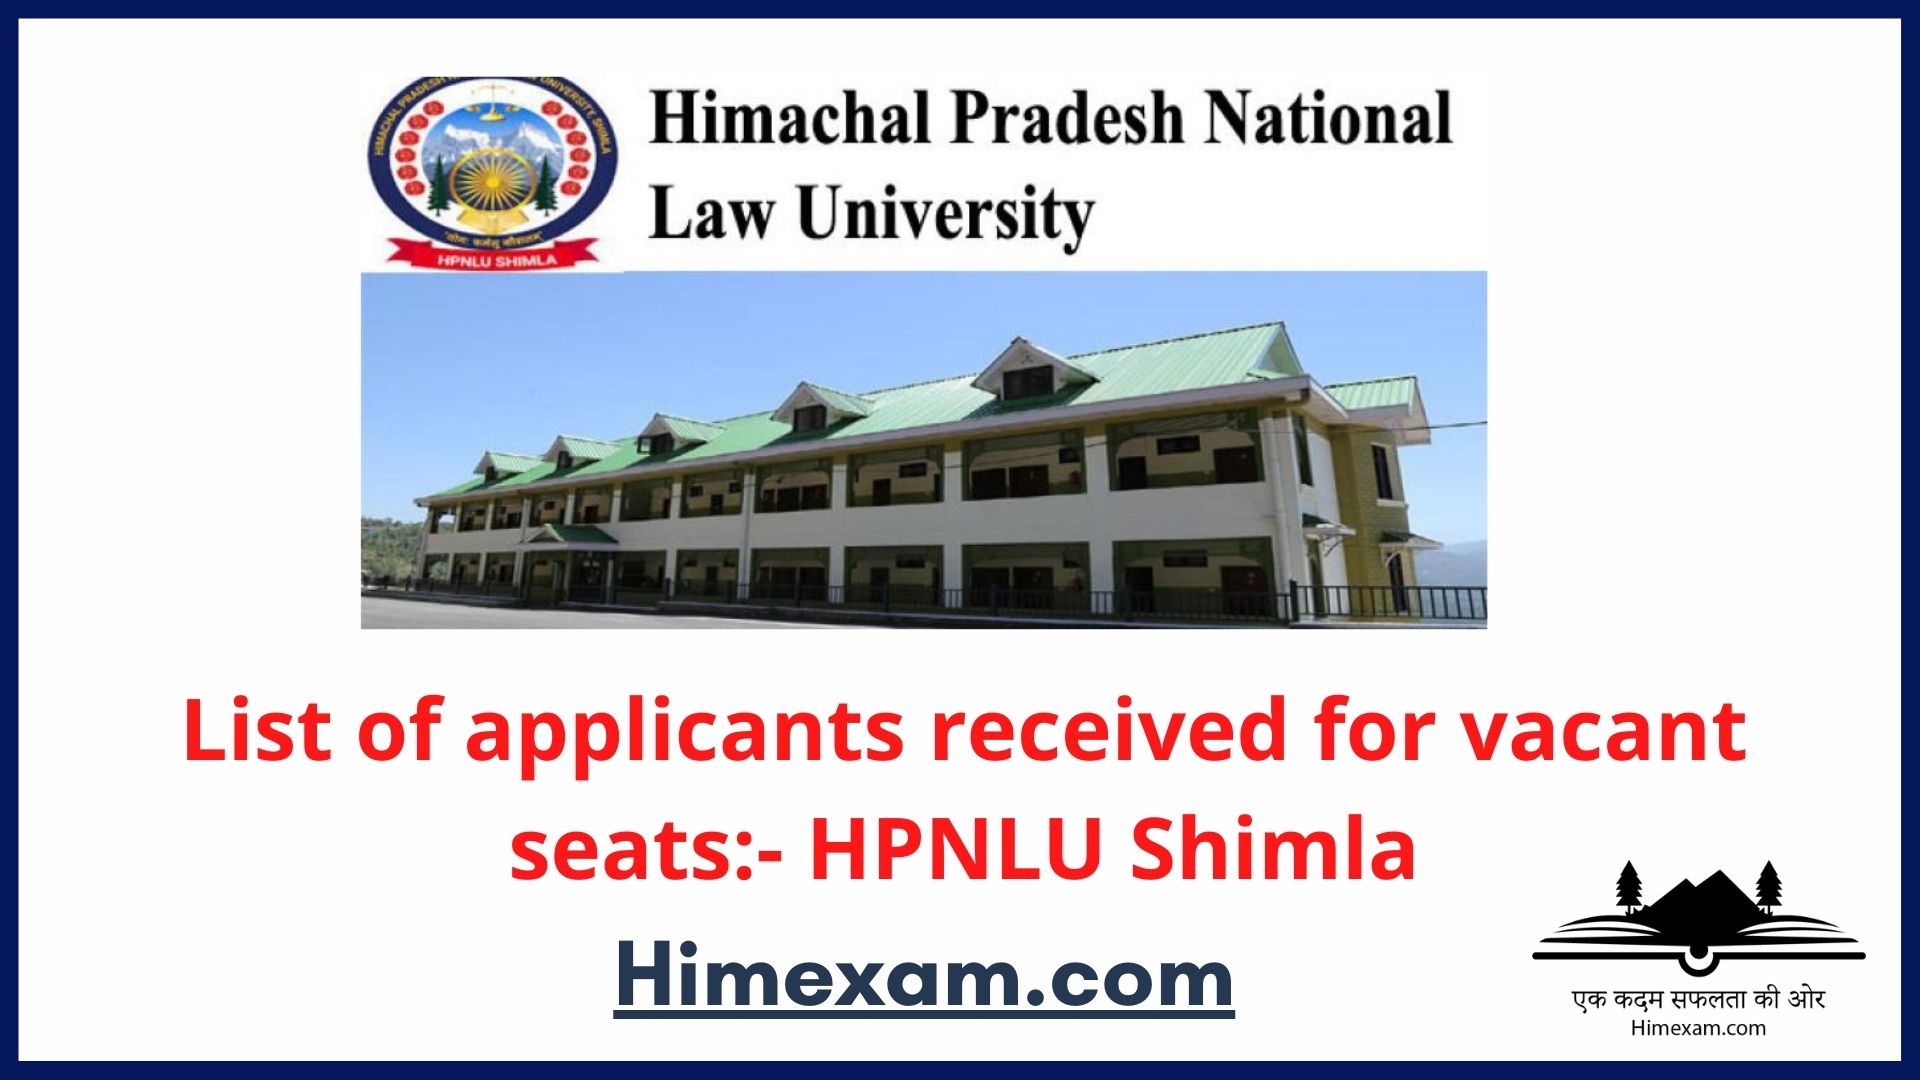 List of applicants received for vacant seats:- HPNLU Shimla